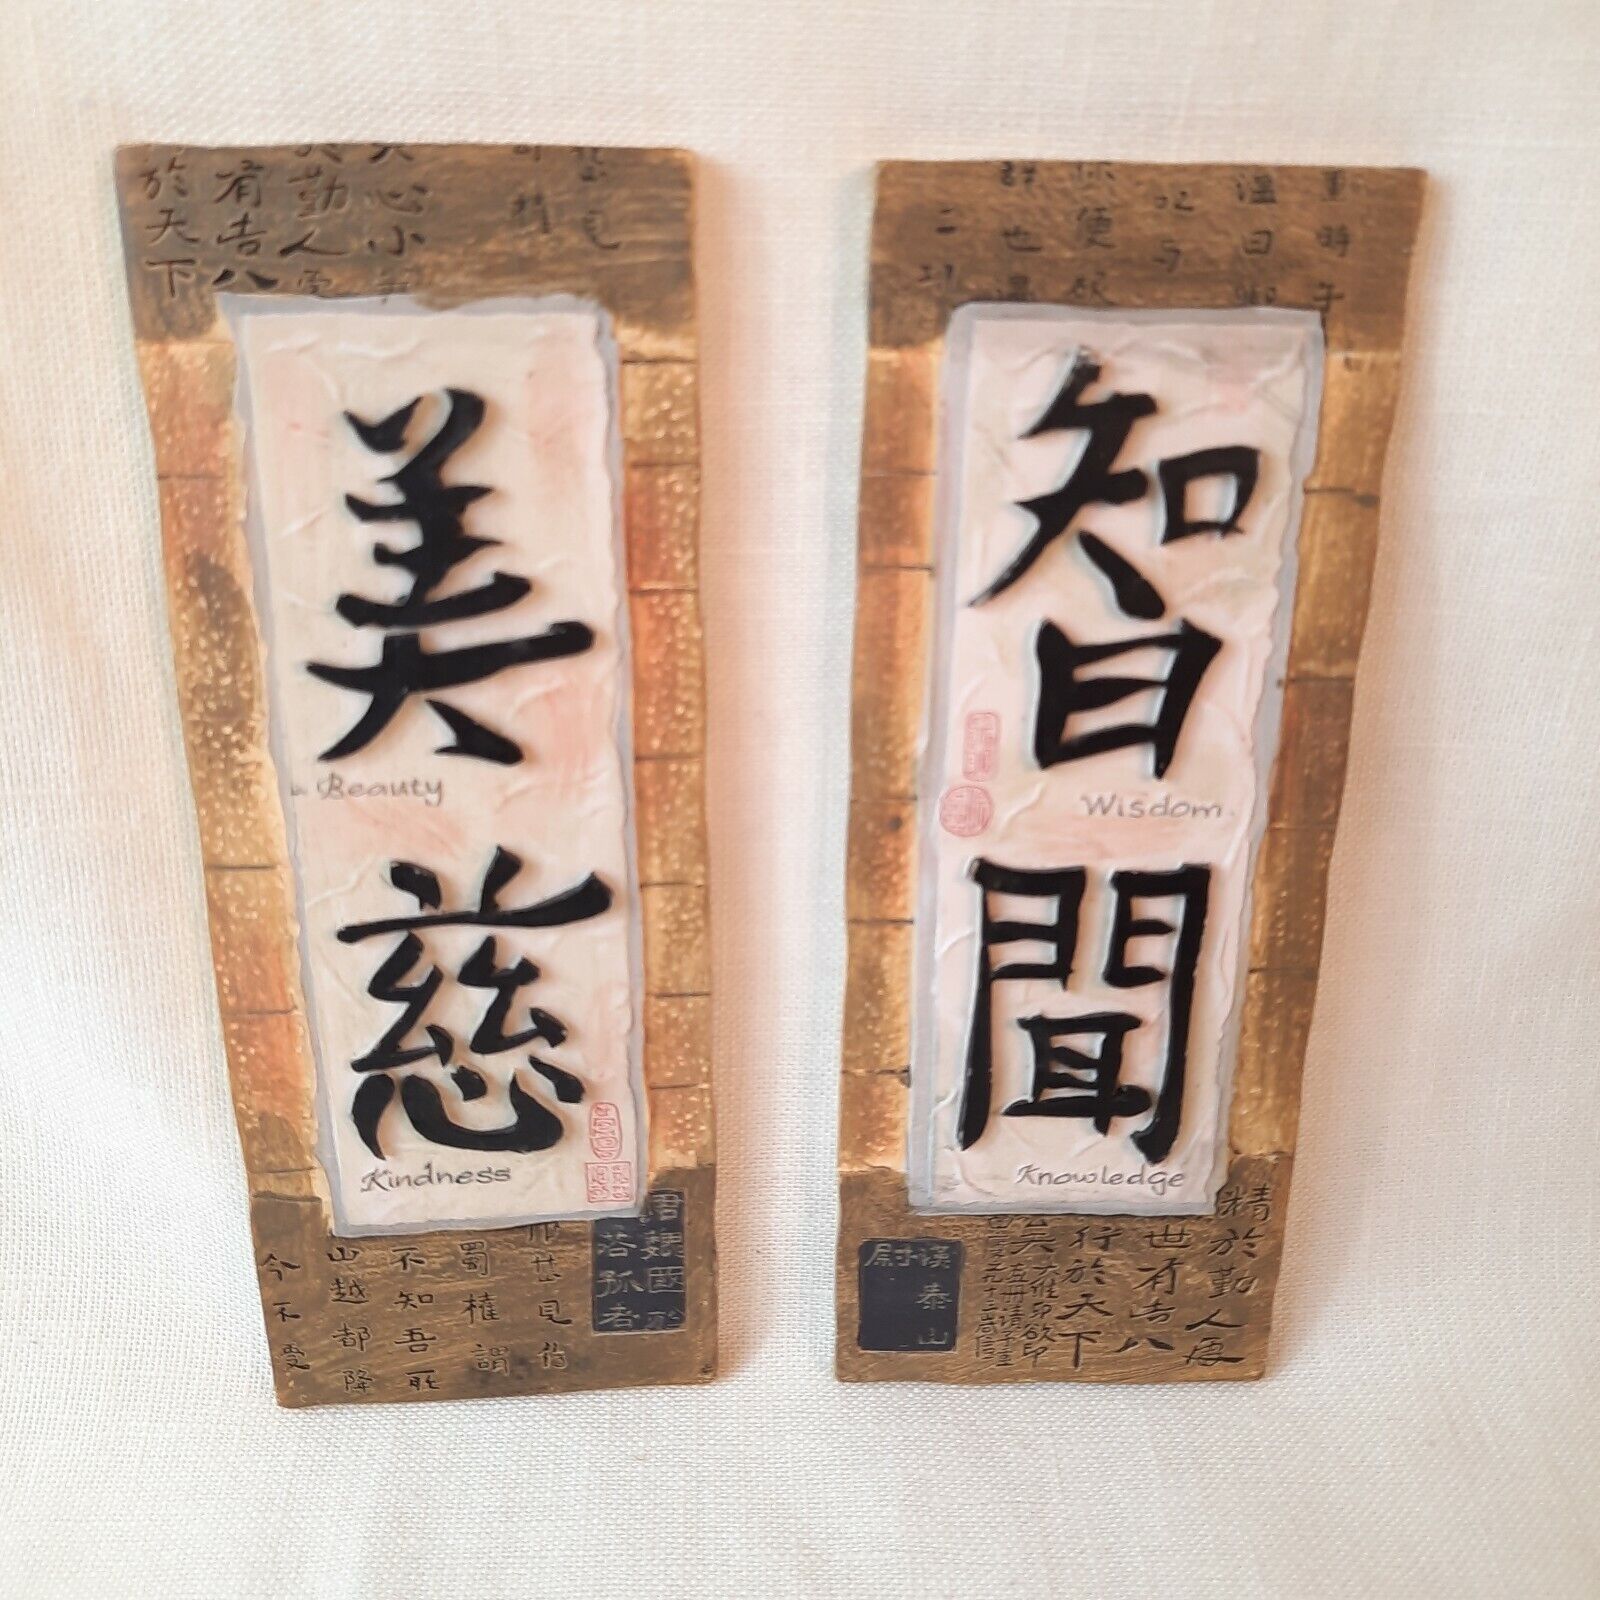 2 Chinese 3x8 Resin Plaques (Wisdom, Knowledge, Beauty, Kindness) Home Decor Без бренда